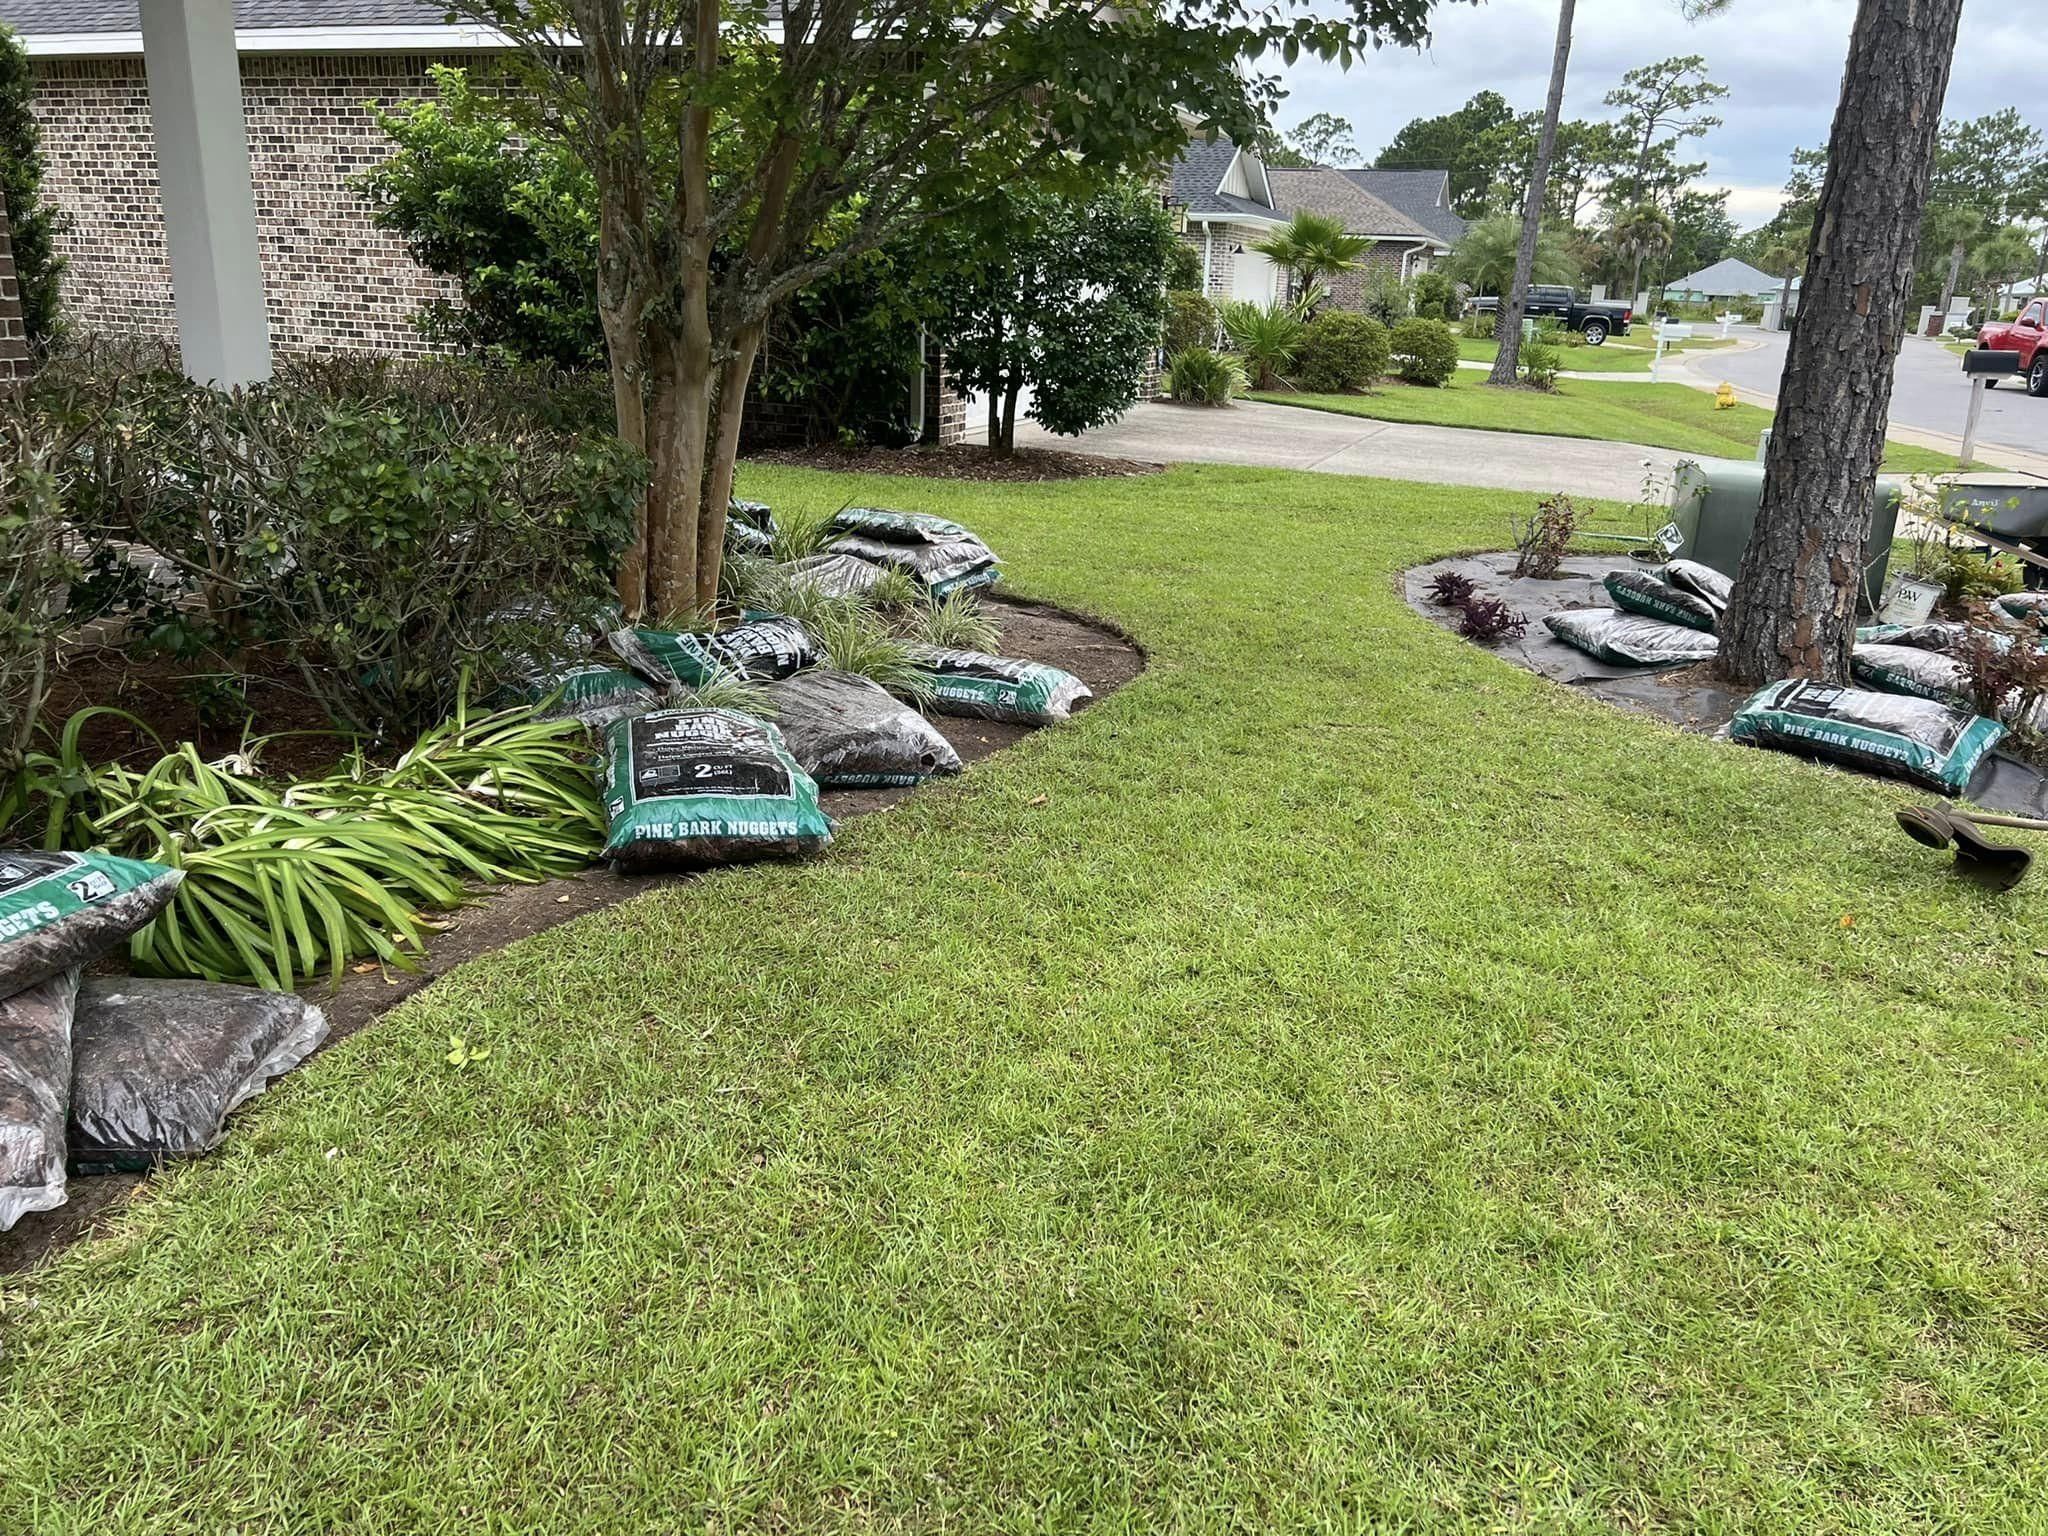 All Photos for Poarch Creek Landscaping in Santa Rosa Beach, FL